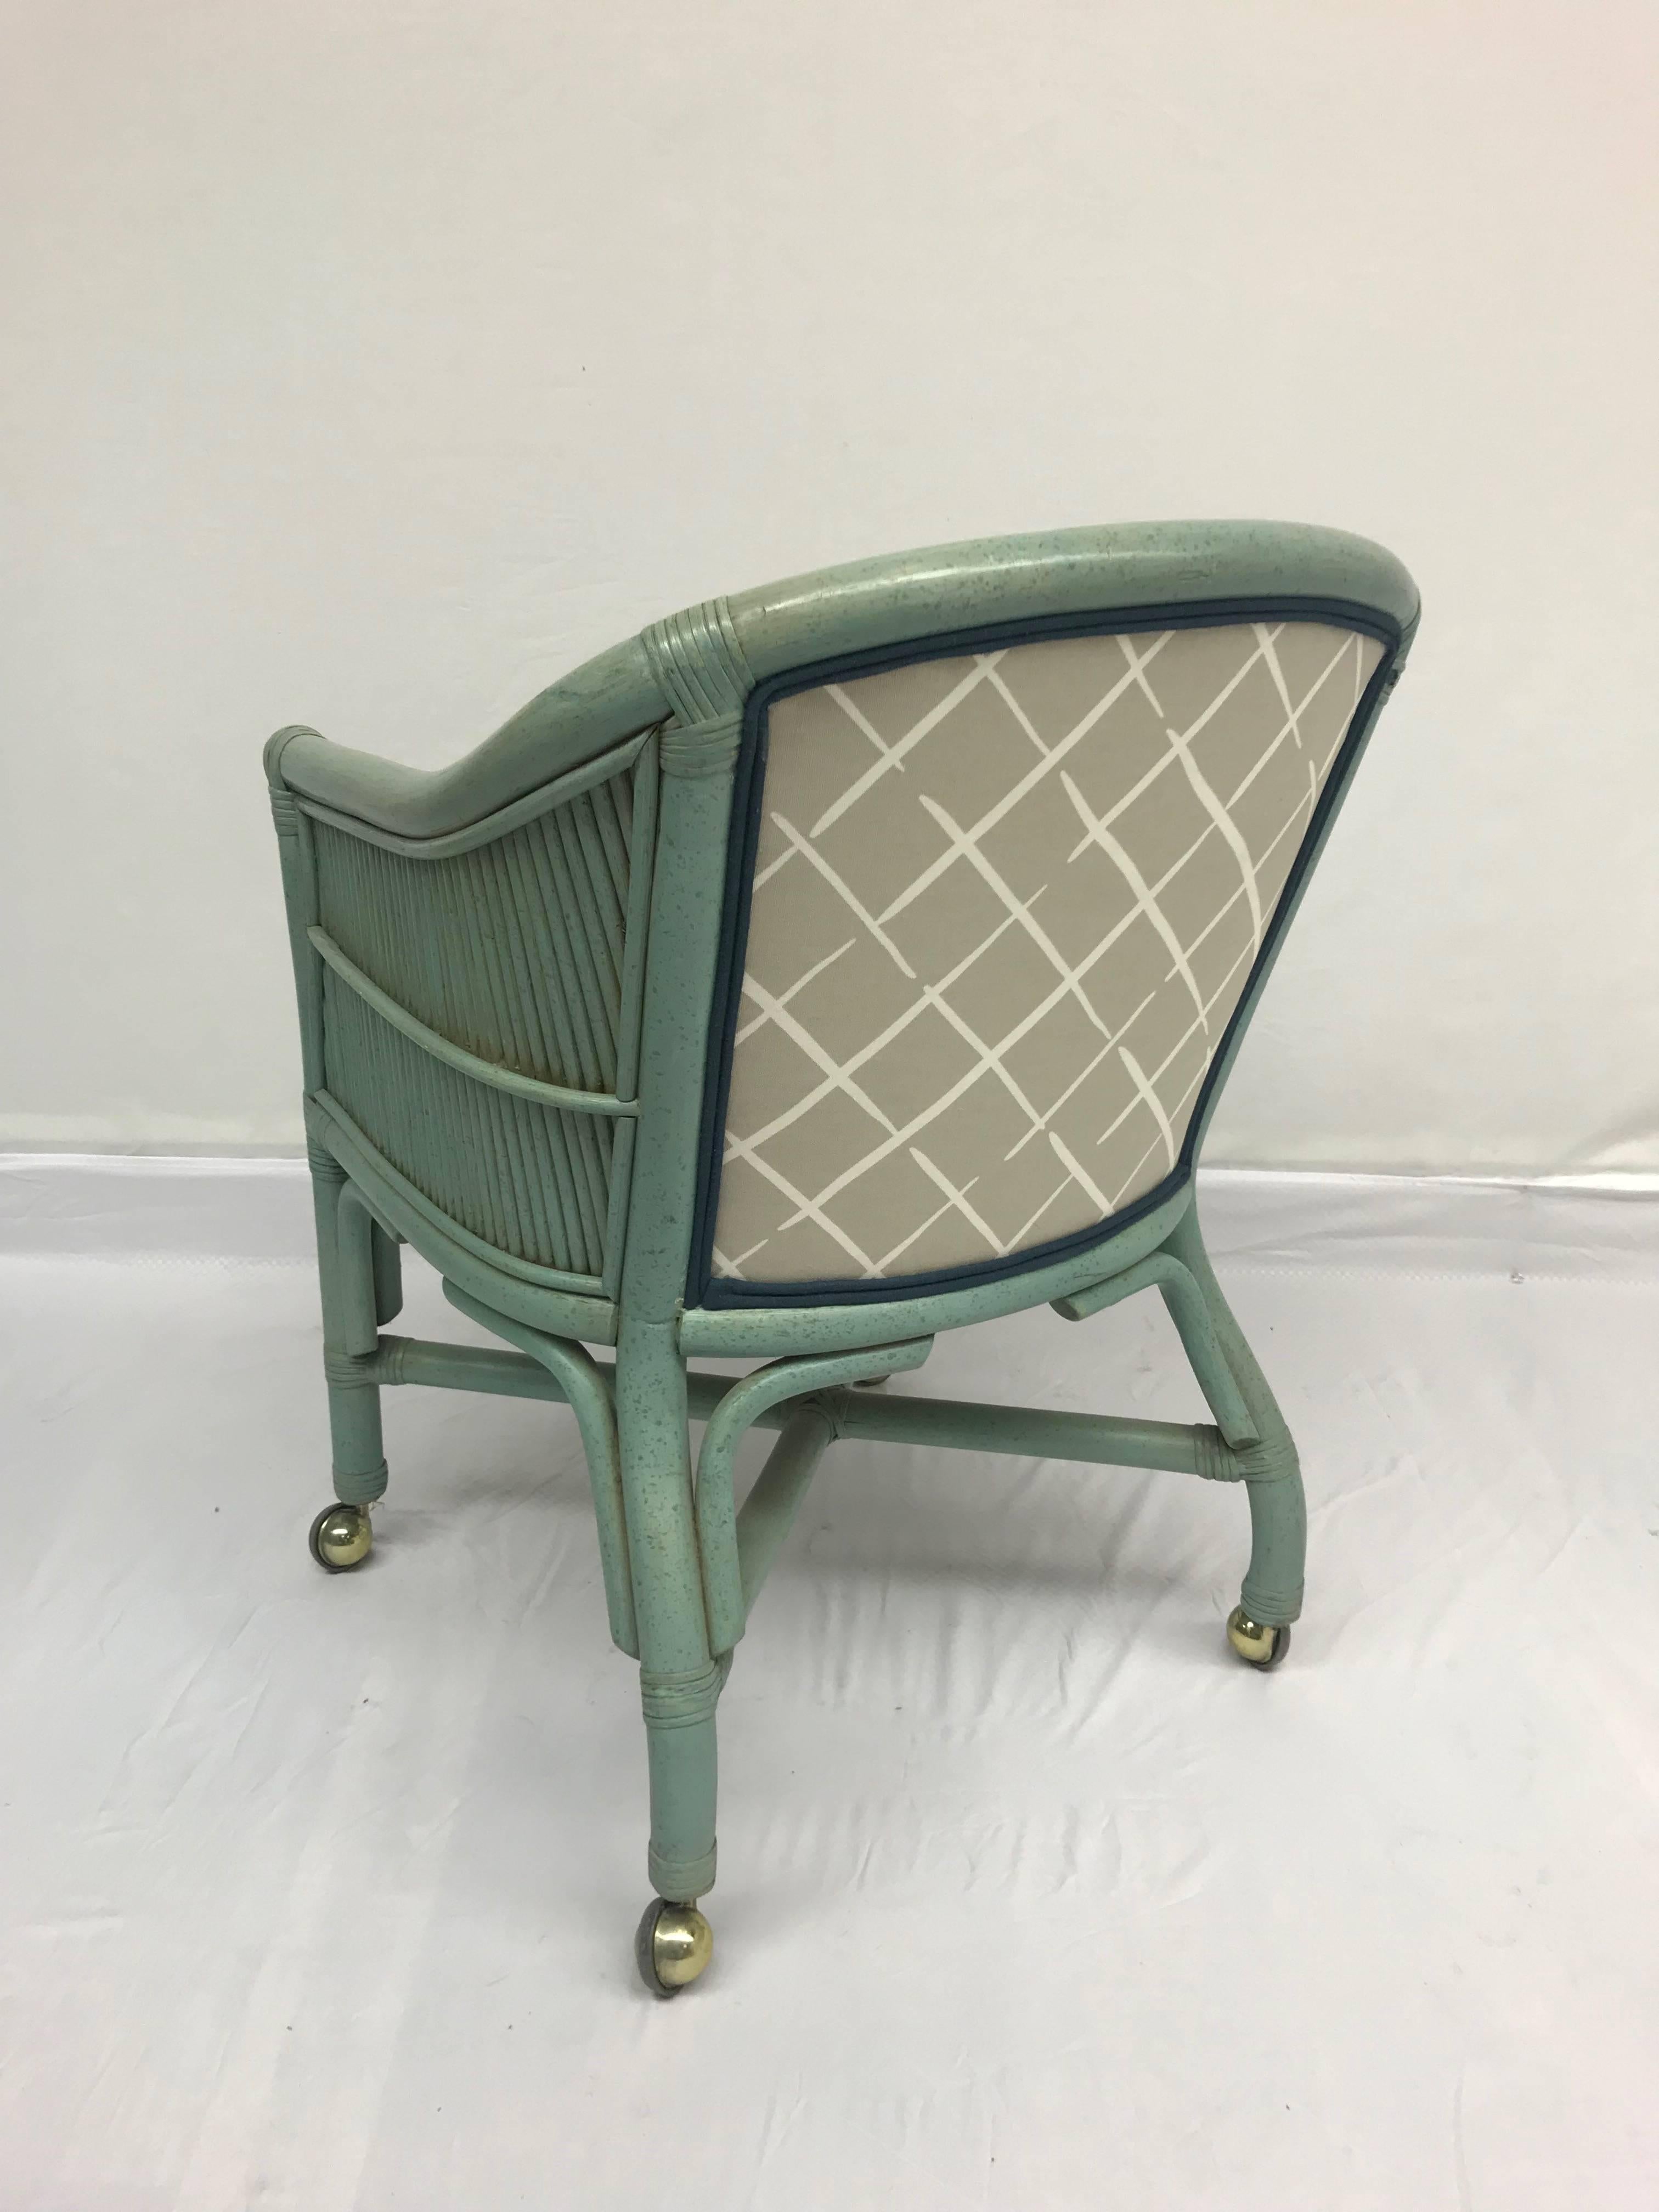 Painted Vintage Seafoam Blue Rattan Chairs With Casters - Set of 4 For Sale